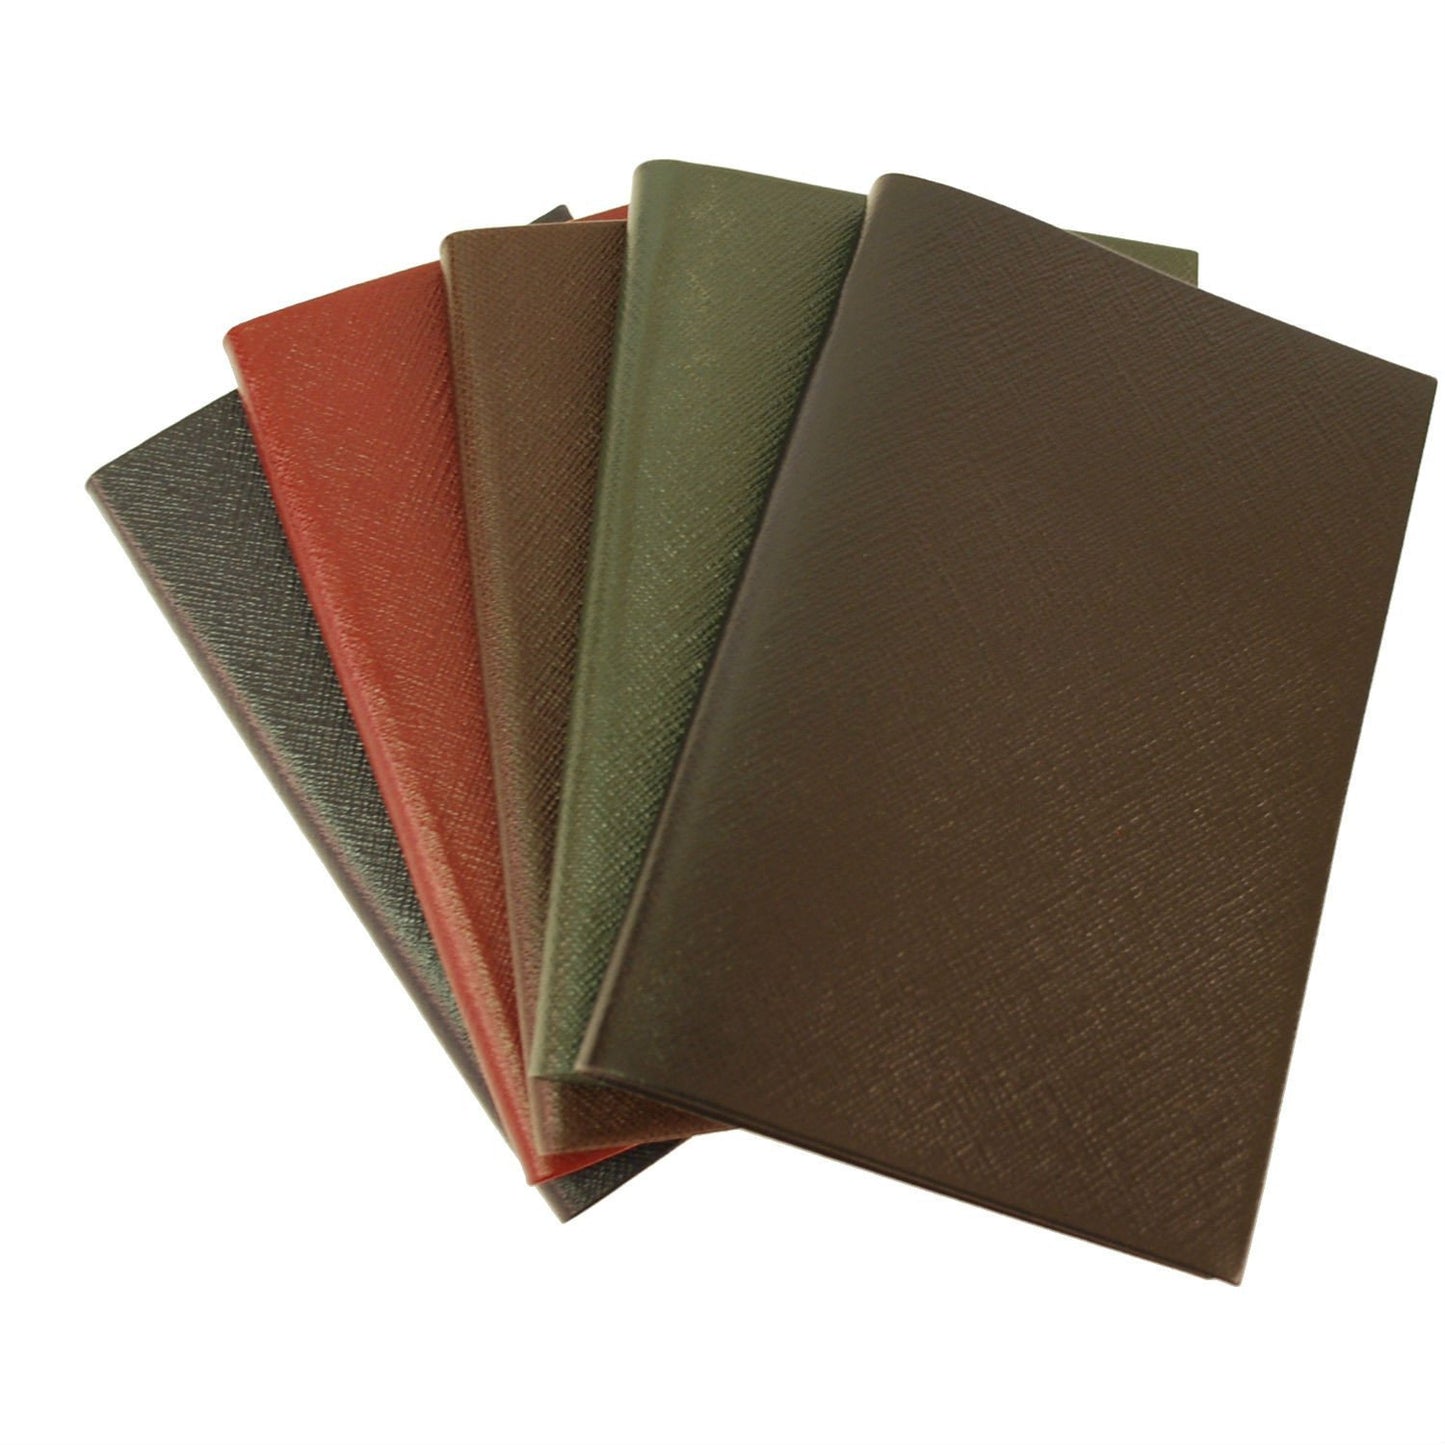 Crossgrain Leather Notebook, 7x4, "Shopping Notes", Blank Pages-Titled Notebooks-Sterling-and-Burke